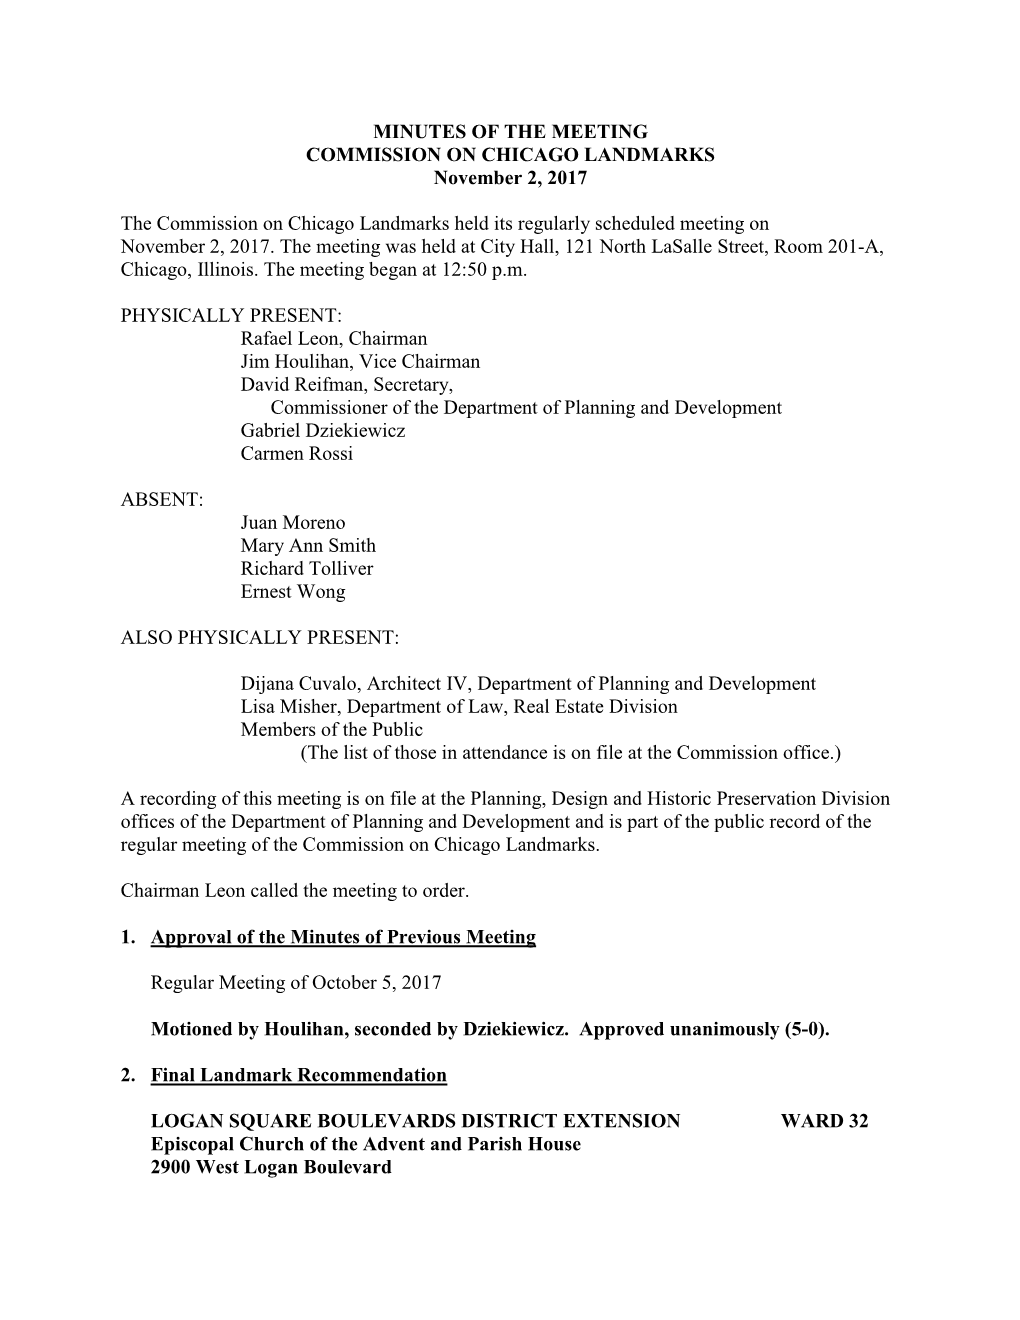 MINUTES of the MEETING COMMISSION on CHICAGO LANDMARKS November 2, 2017